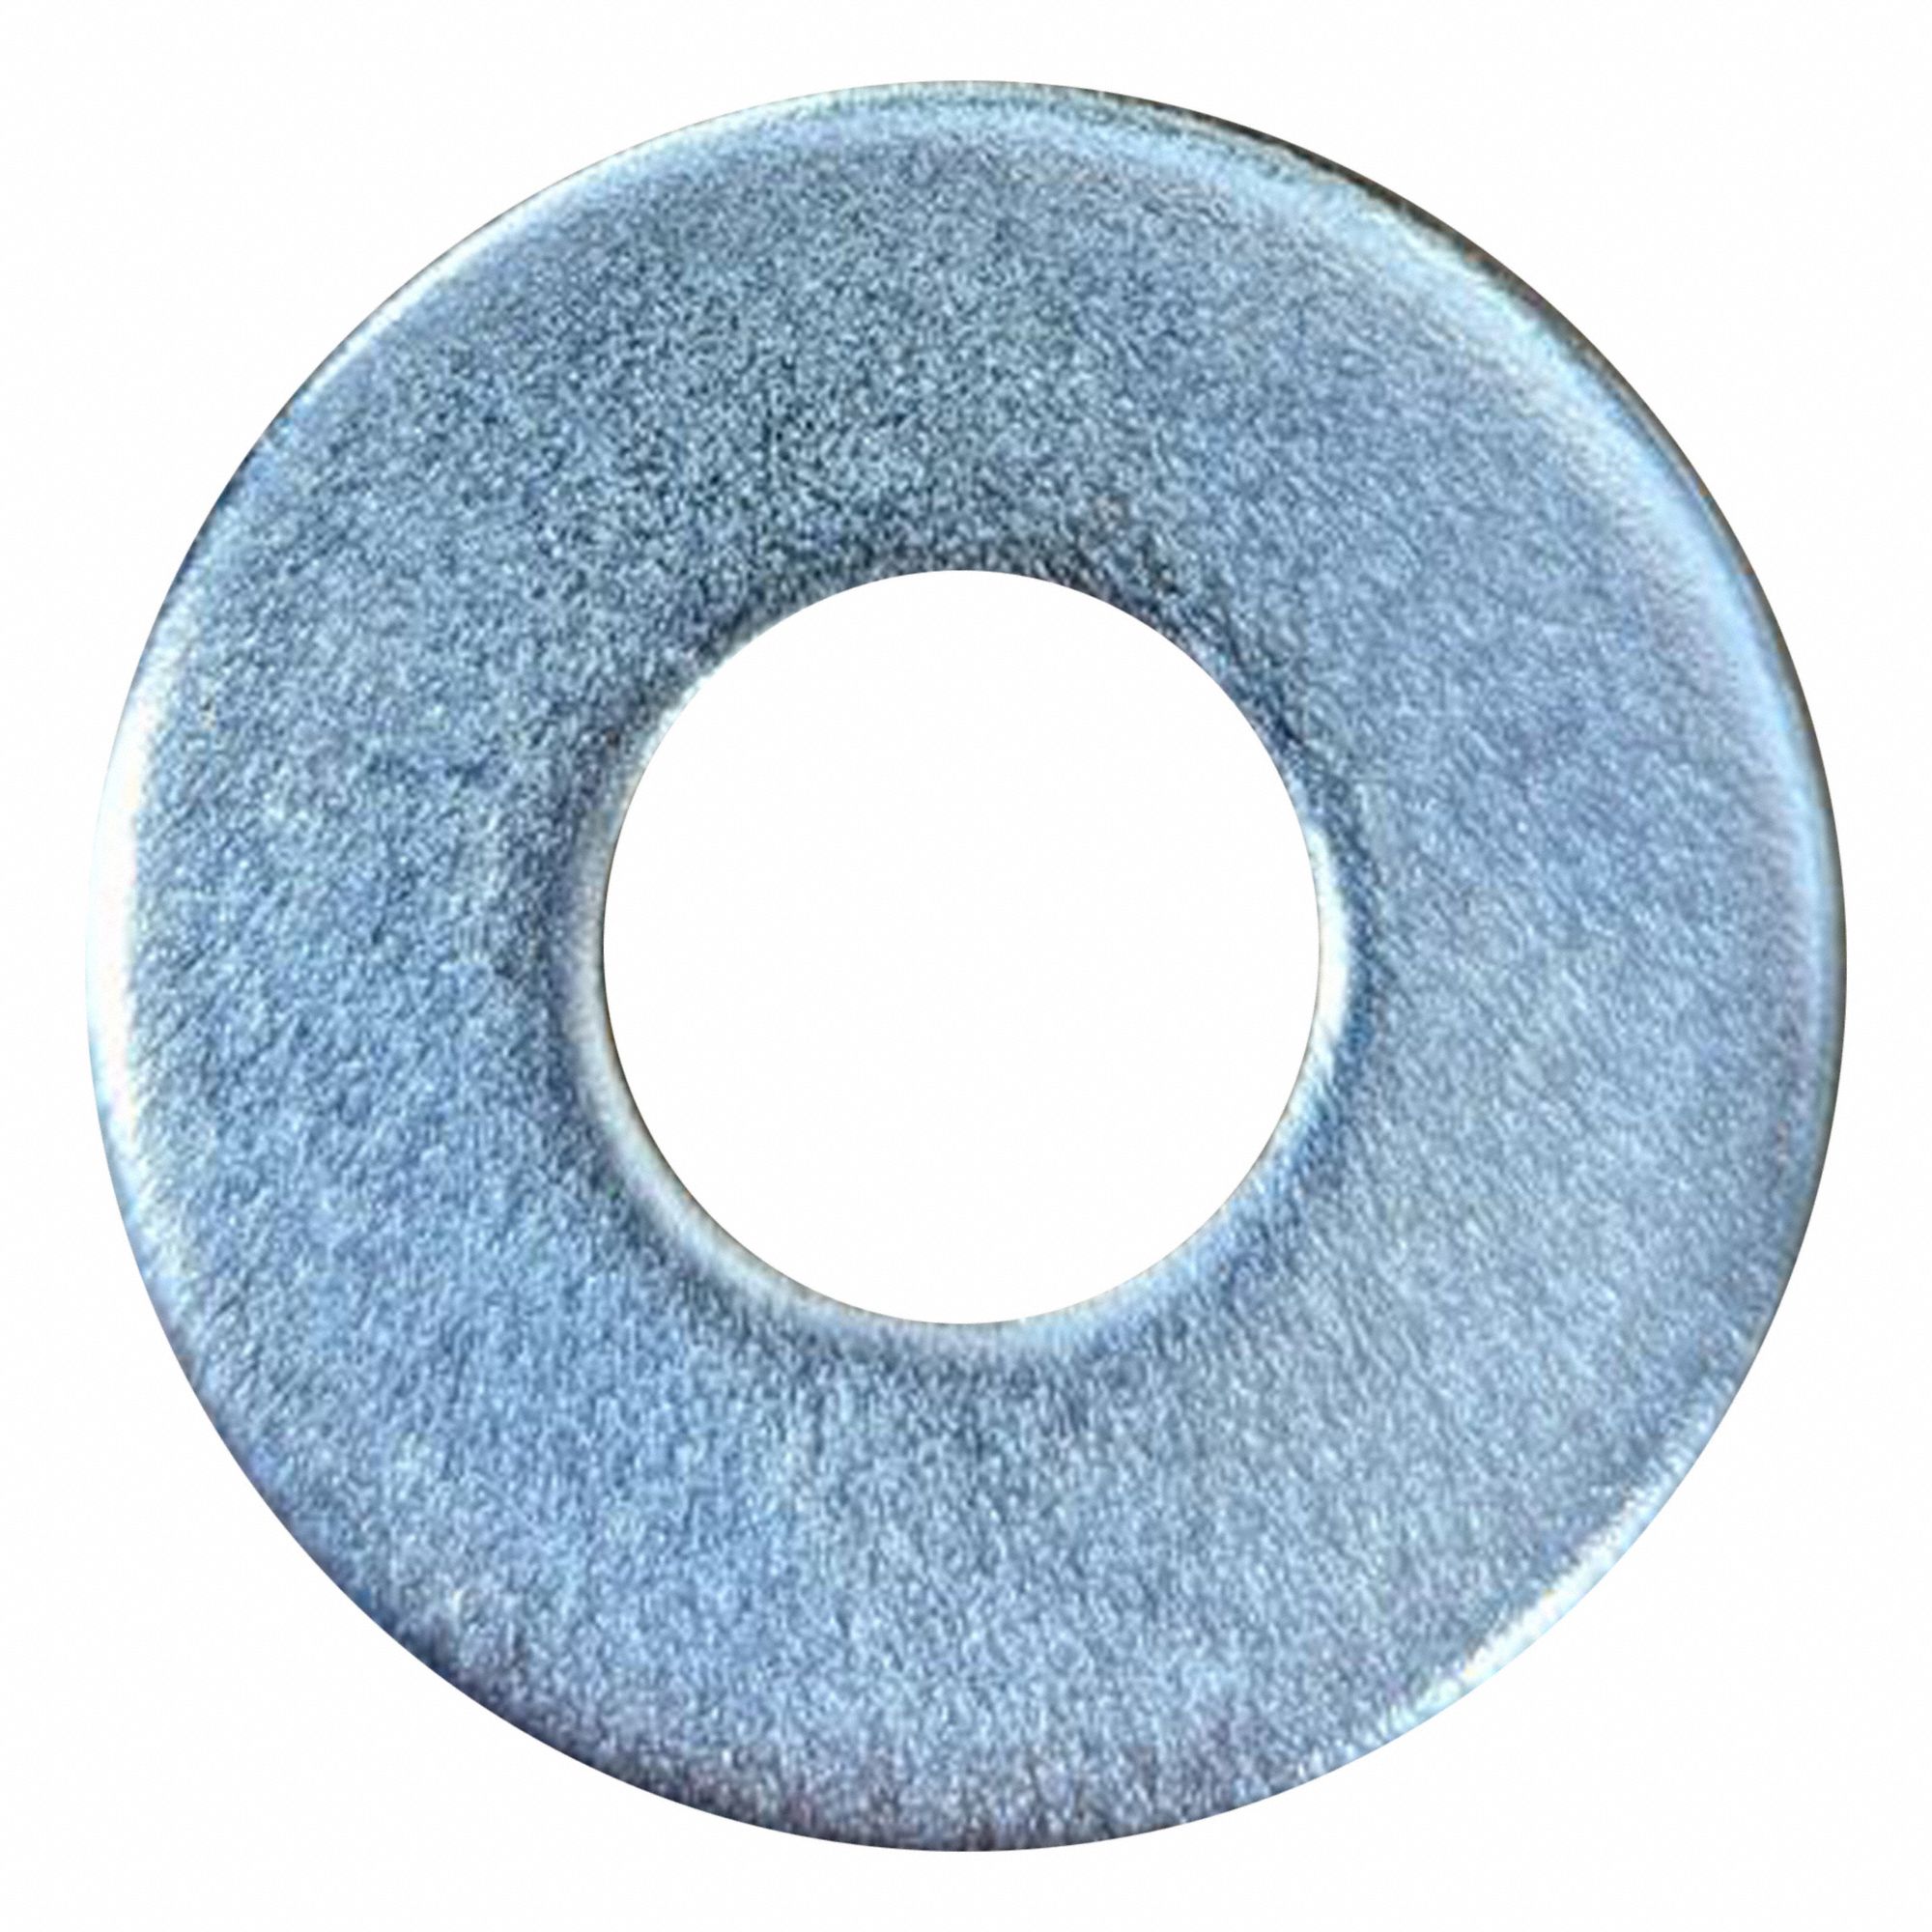 FLAT WASHER,FOR 3/8 IN SCREW SIZE